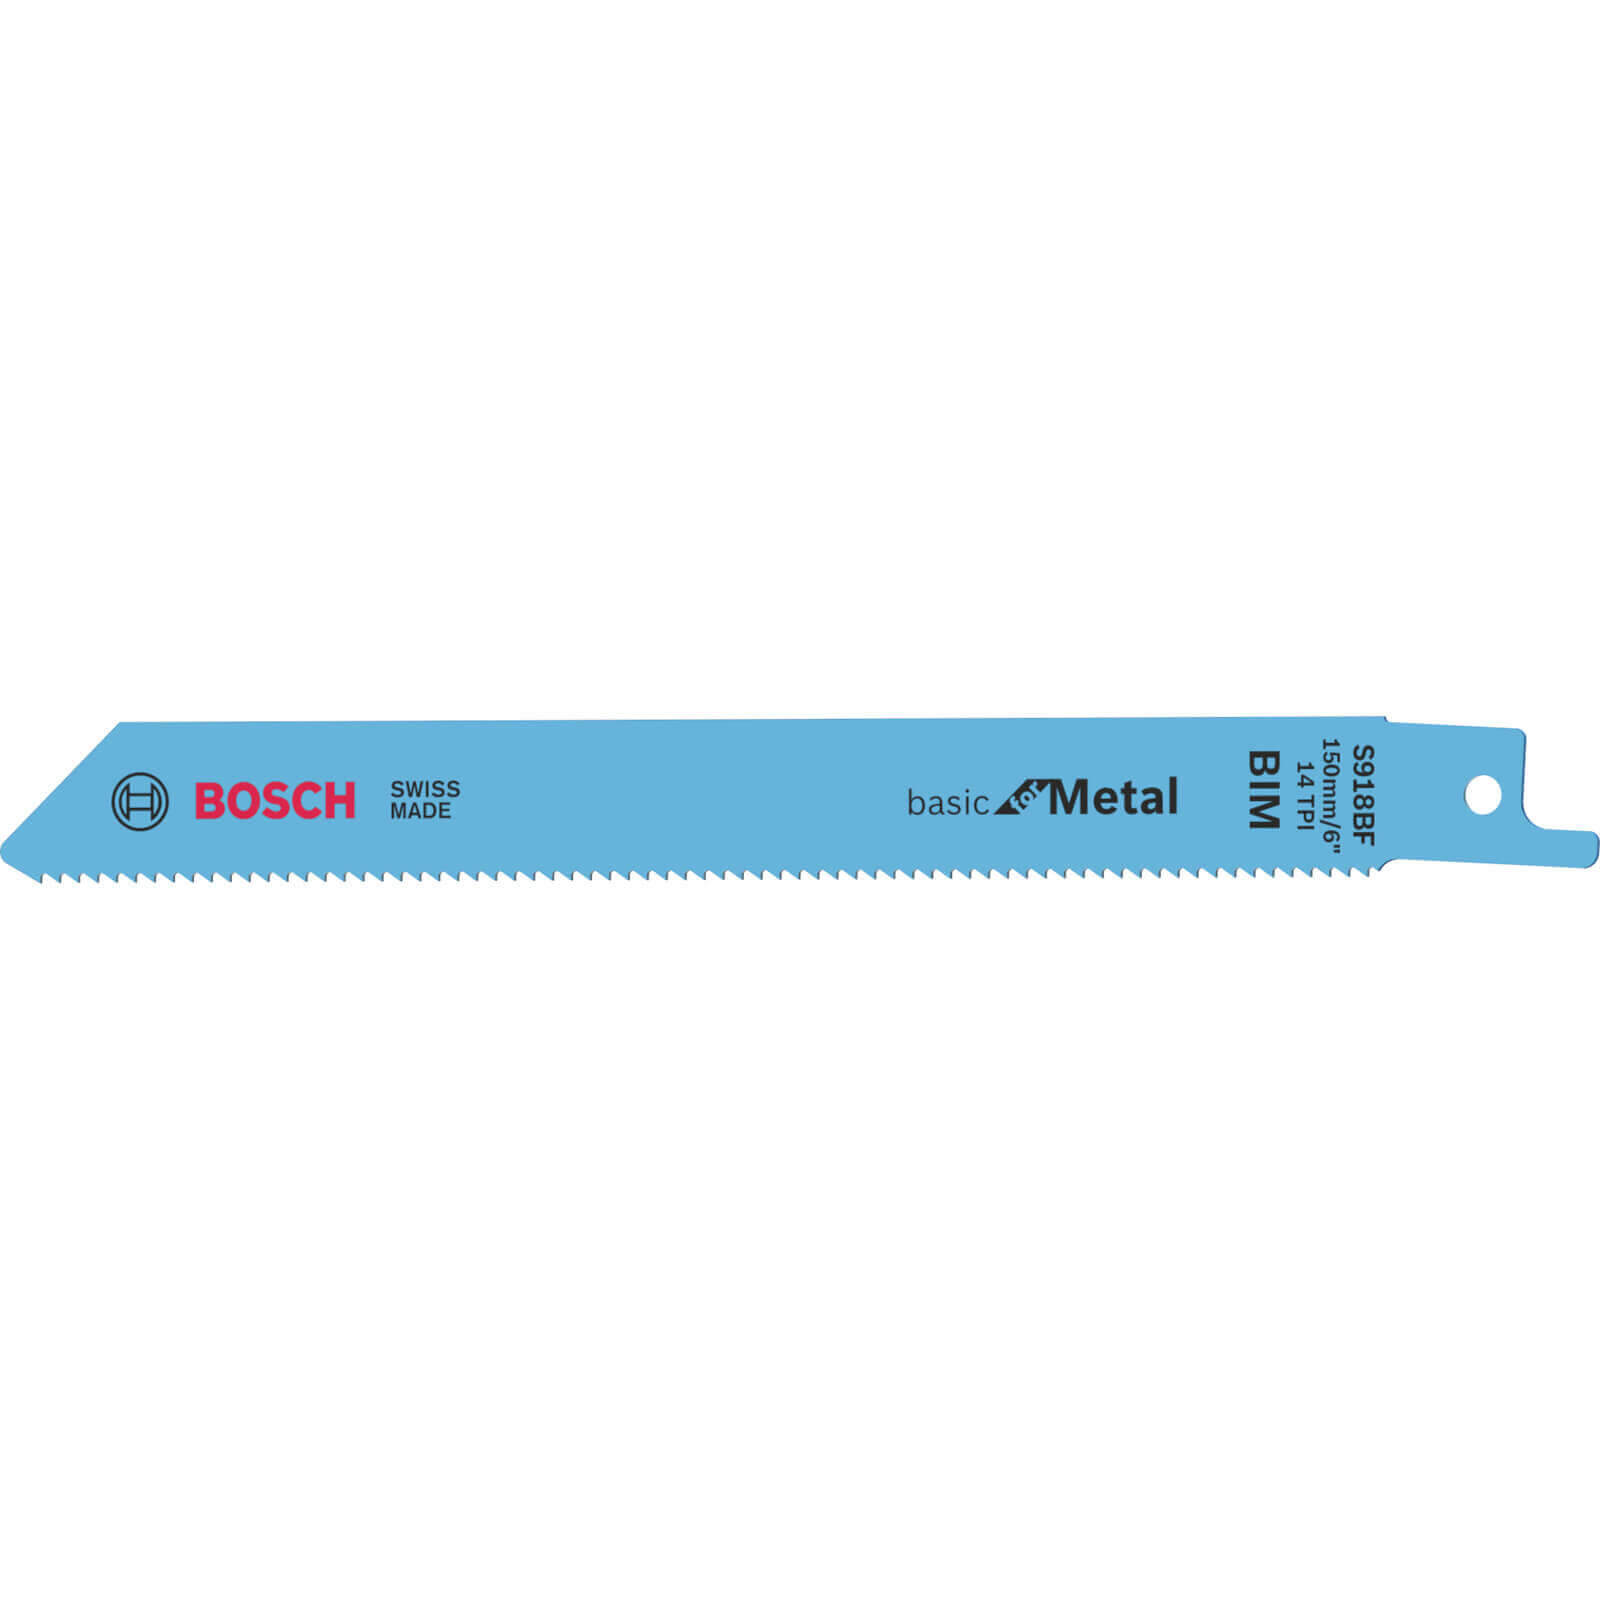 Photos - Power Tool Accessory Bosch S918B Metal Cutting Reciprocating Sabre Saw Blades Pack of 5 